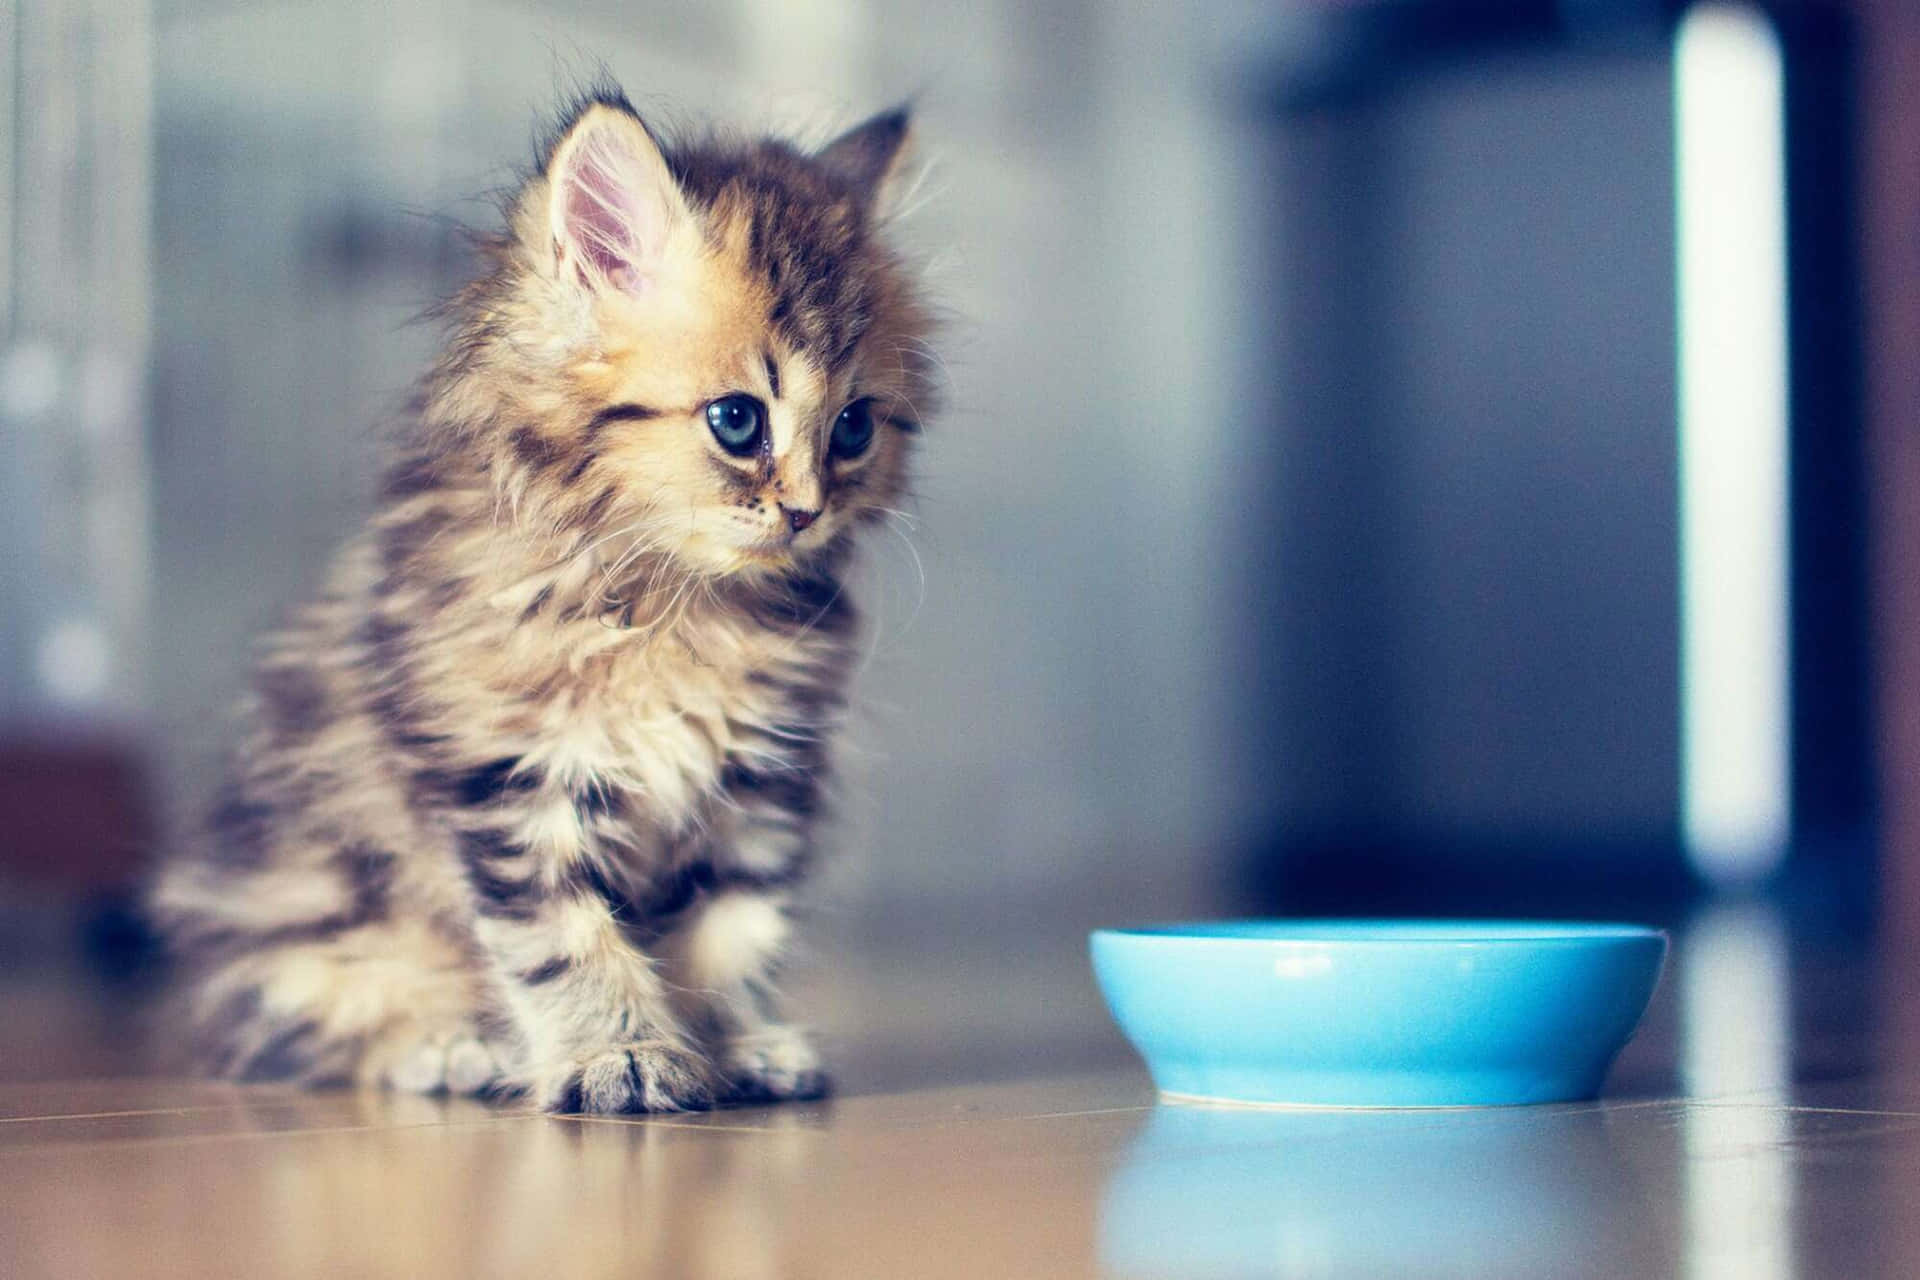 This cute little kitty is sure to brighten your day!